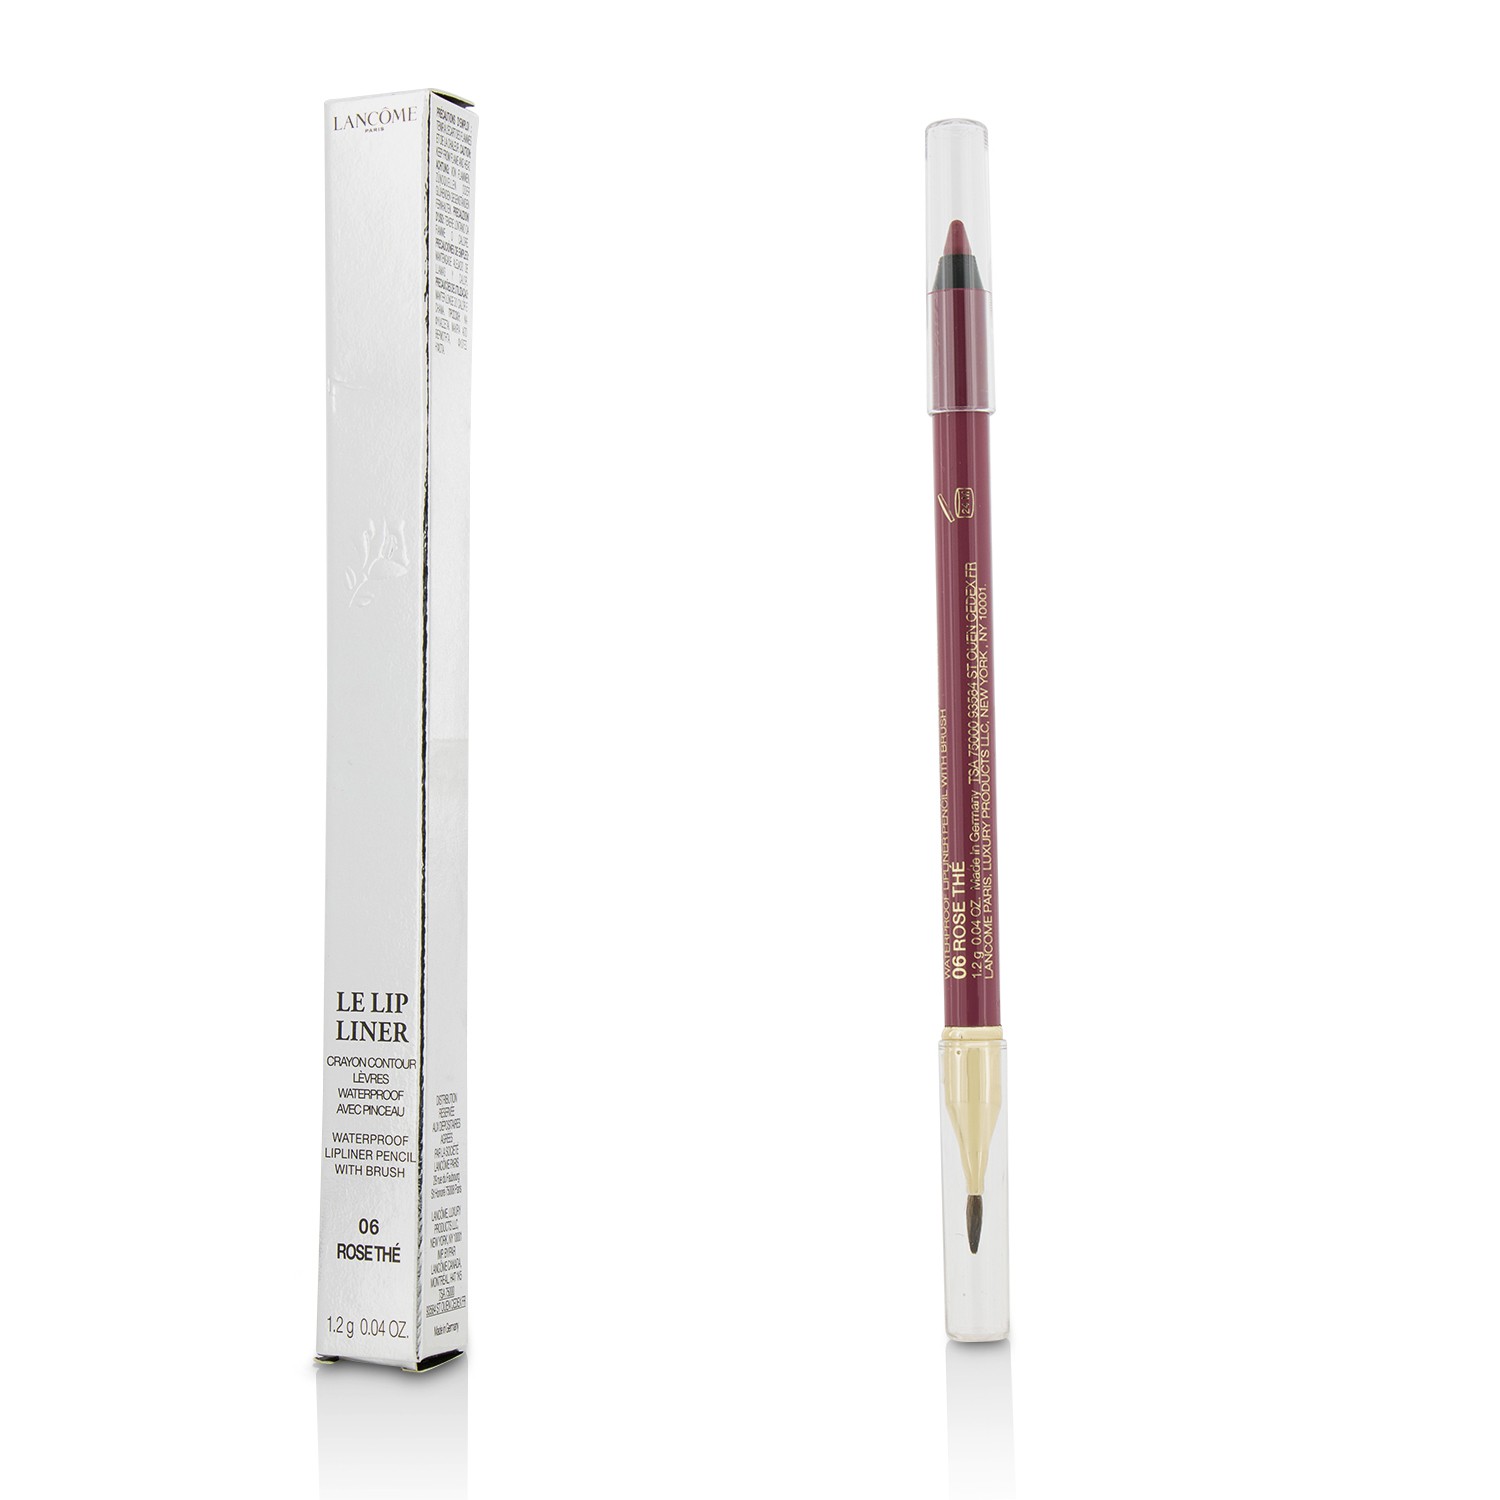 Le Lip Liner Waterproof Lip Pencil With Brush - #06 Rose Th? Lancome Image